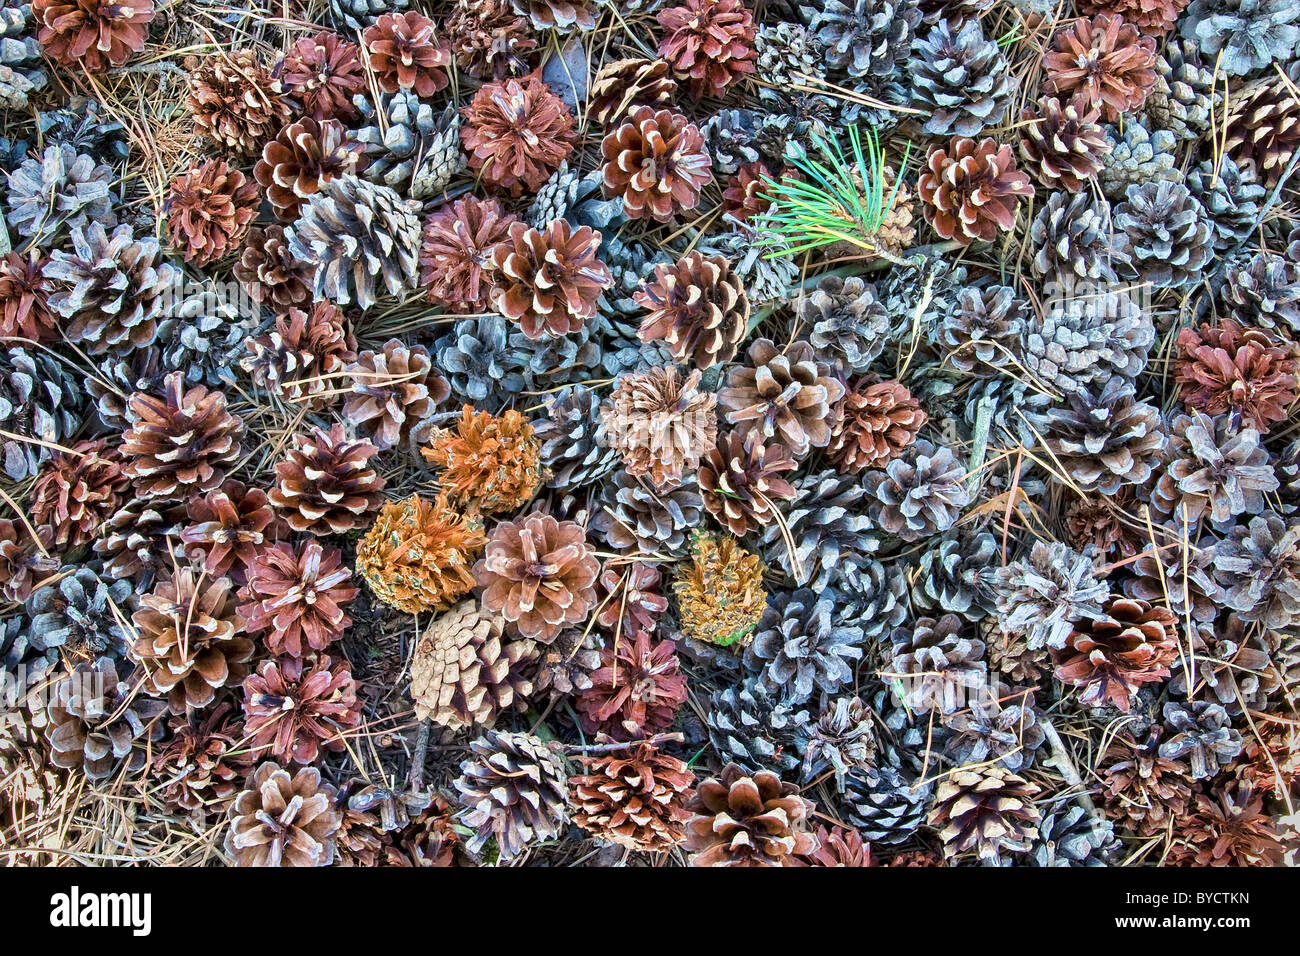 Scots Pine cones and needles covering the ground Stock Photo